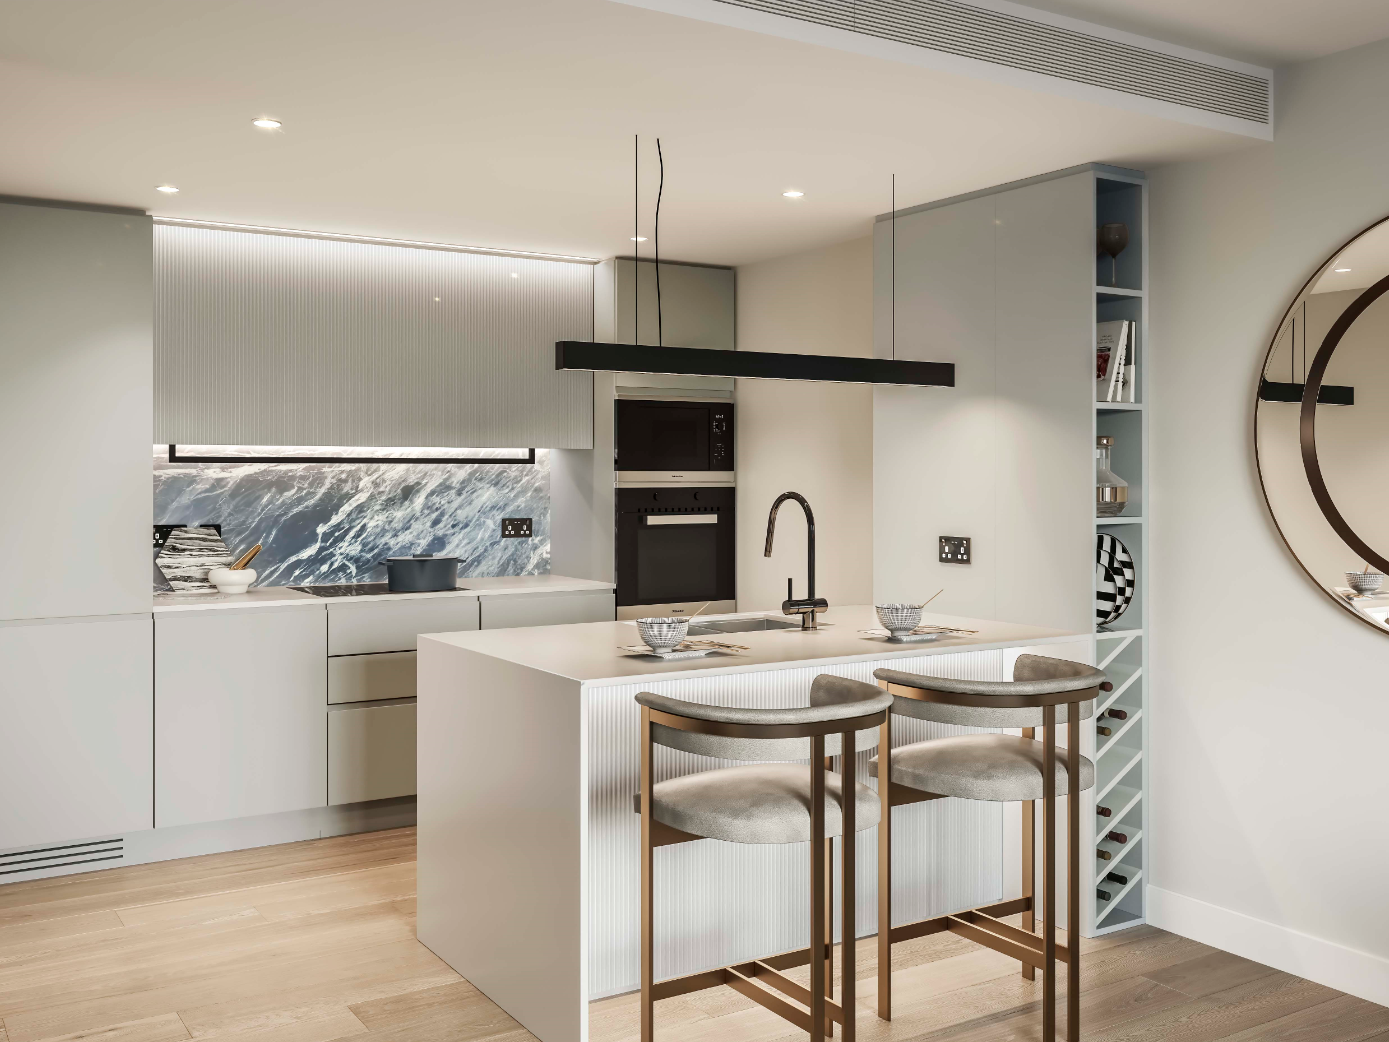 The kitchens are manufactured in Italy and feature bespoke brassware, paneling and fluted detailing to the cabinet fronts, with Italian marble splashbacks